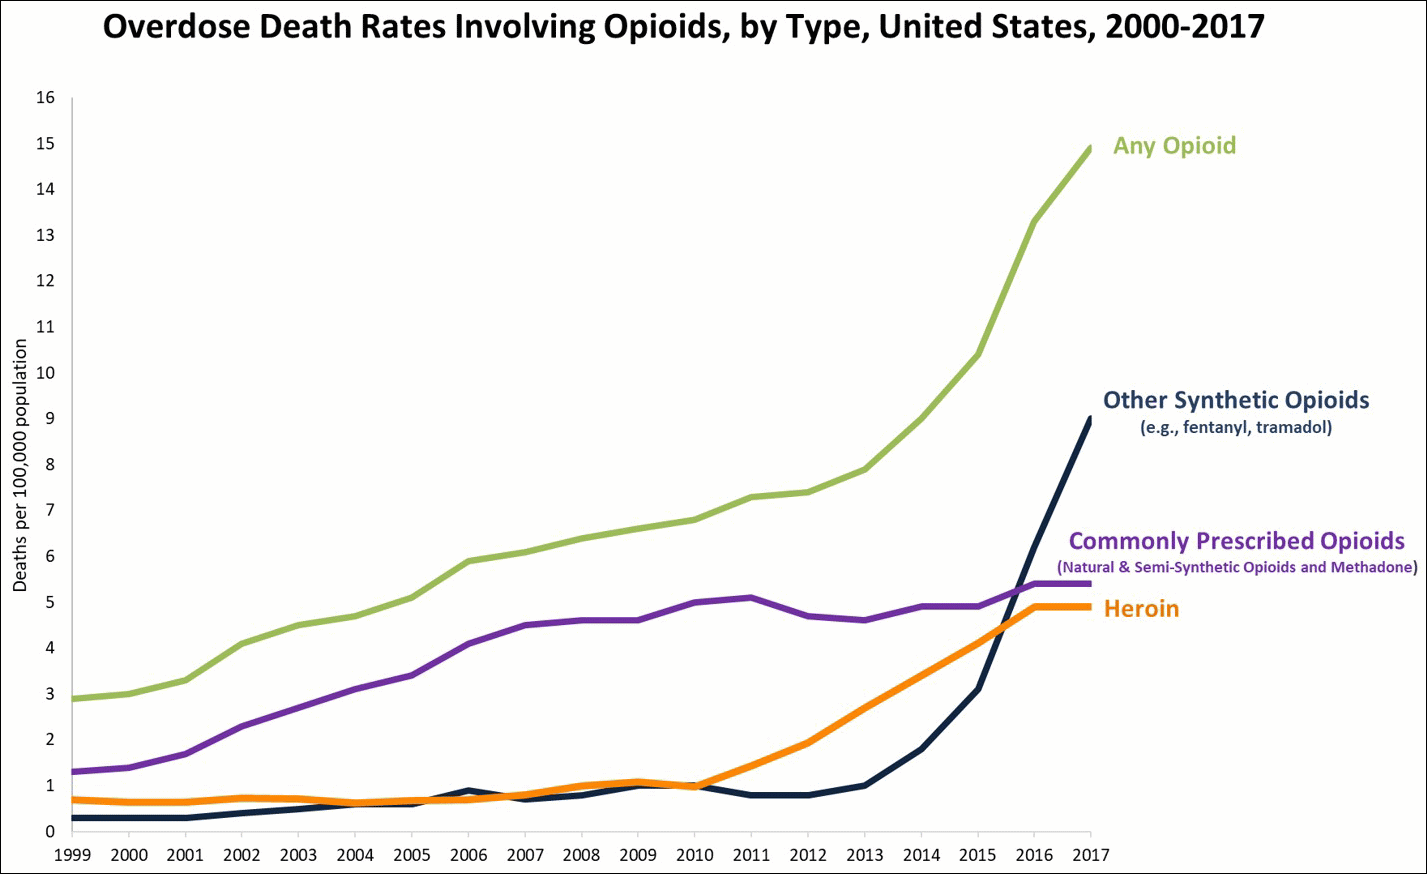 Chart: Overdose Death Rates Involving Opioids, by Type, US, 2000-2017